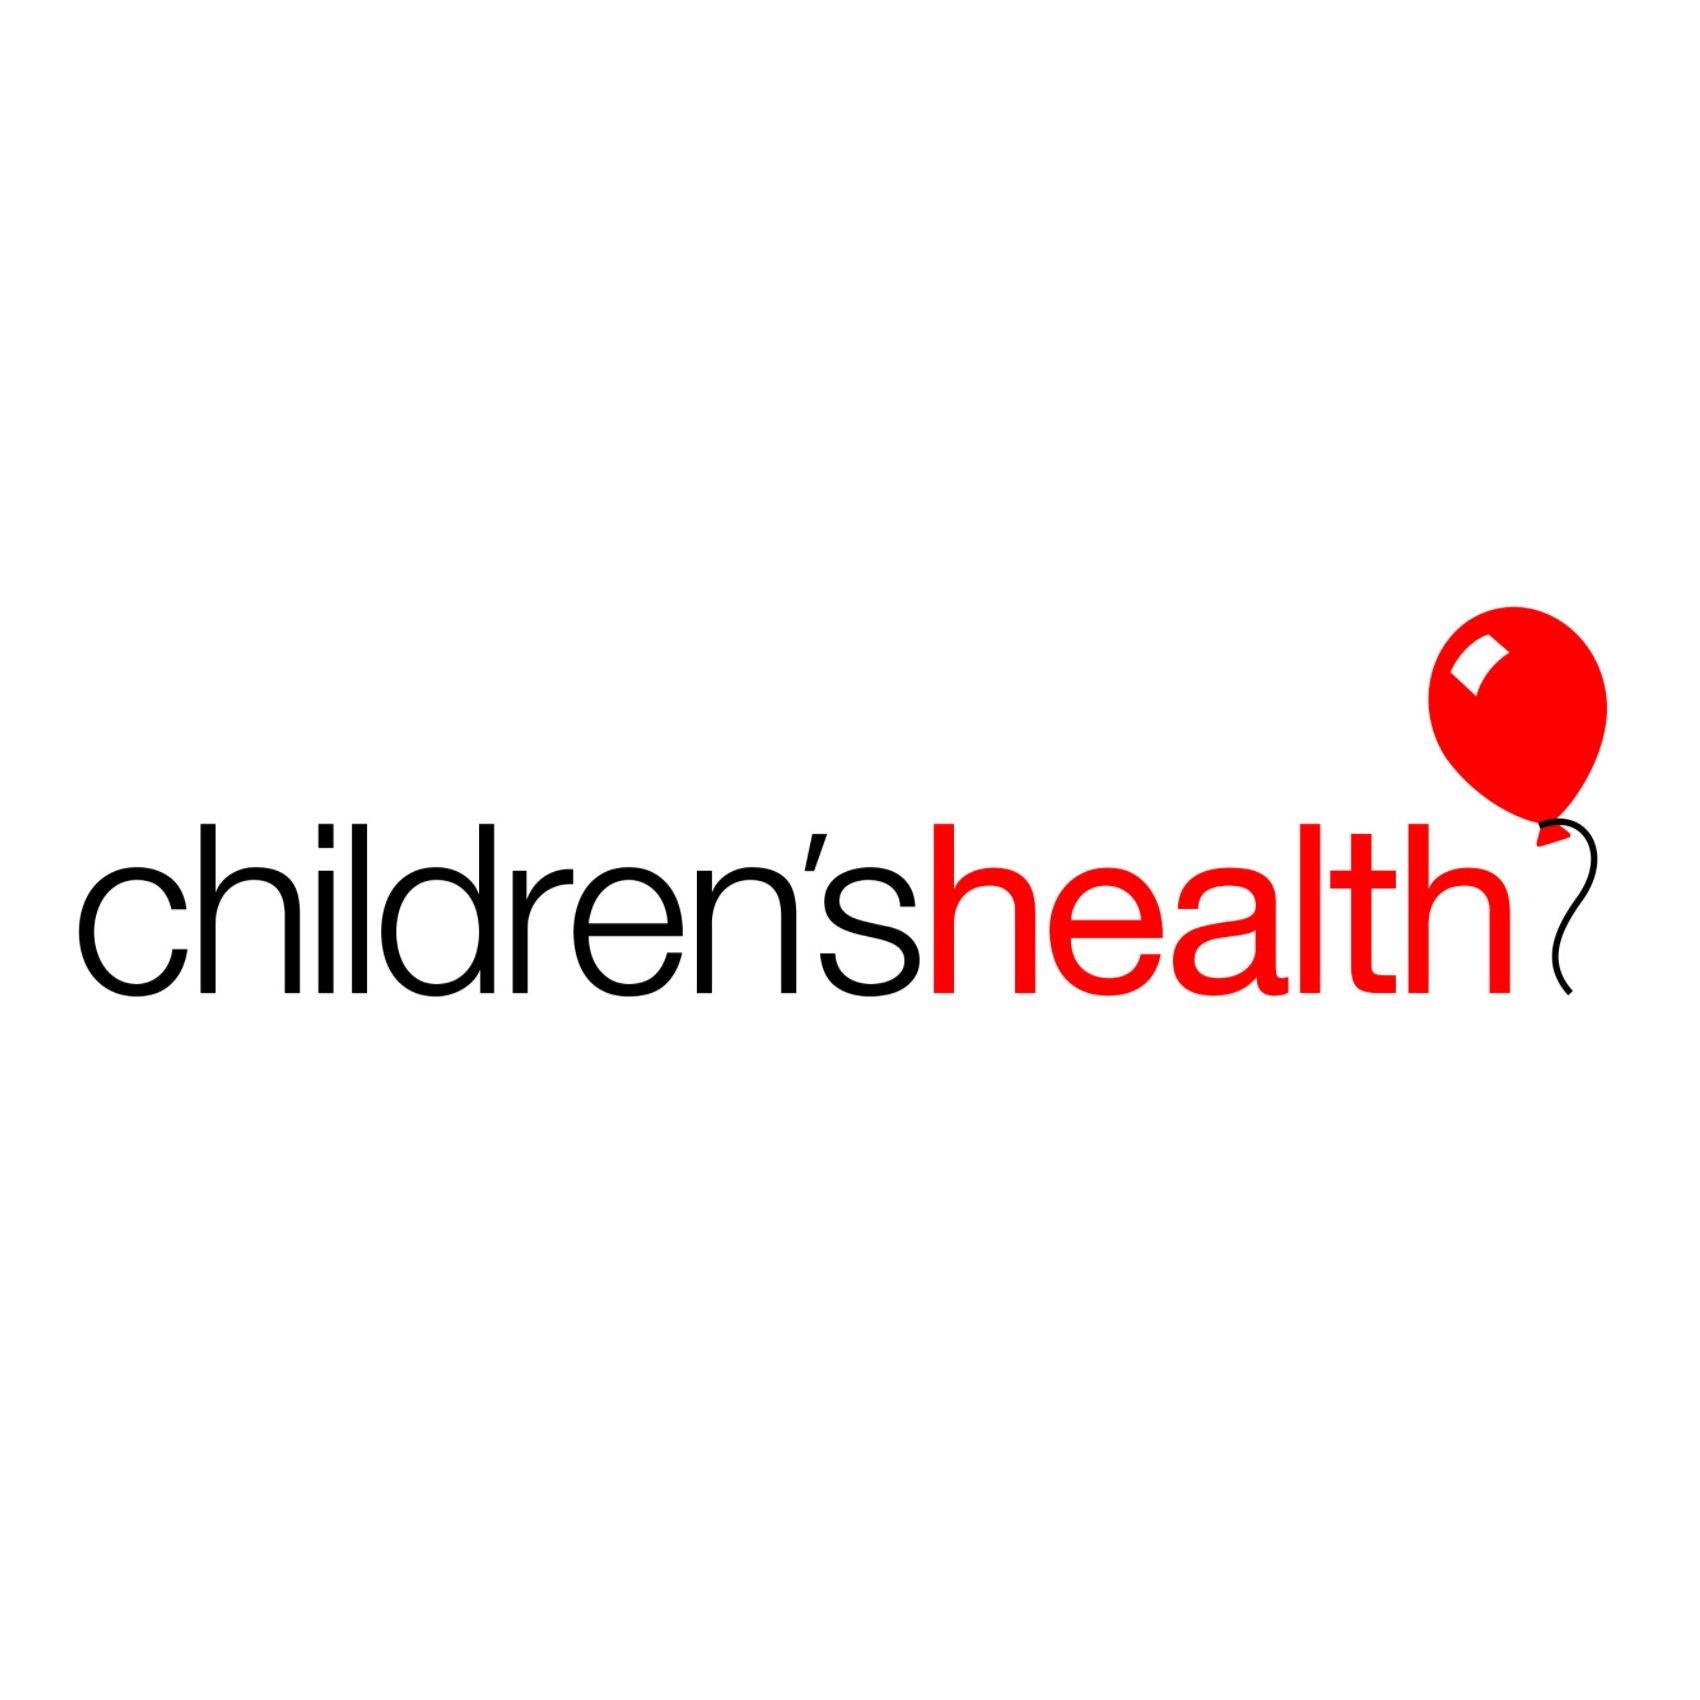 Children’s Health Content Strategy Focuses on Search, Engagement to Achieve Record-Breaking Results - Logo - https://s39939.pcdn.co/wp-content/uploads/2020/06/Childrens-Health_Content-Marketing.jpg